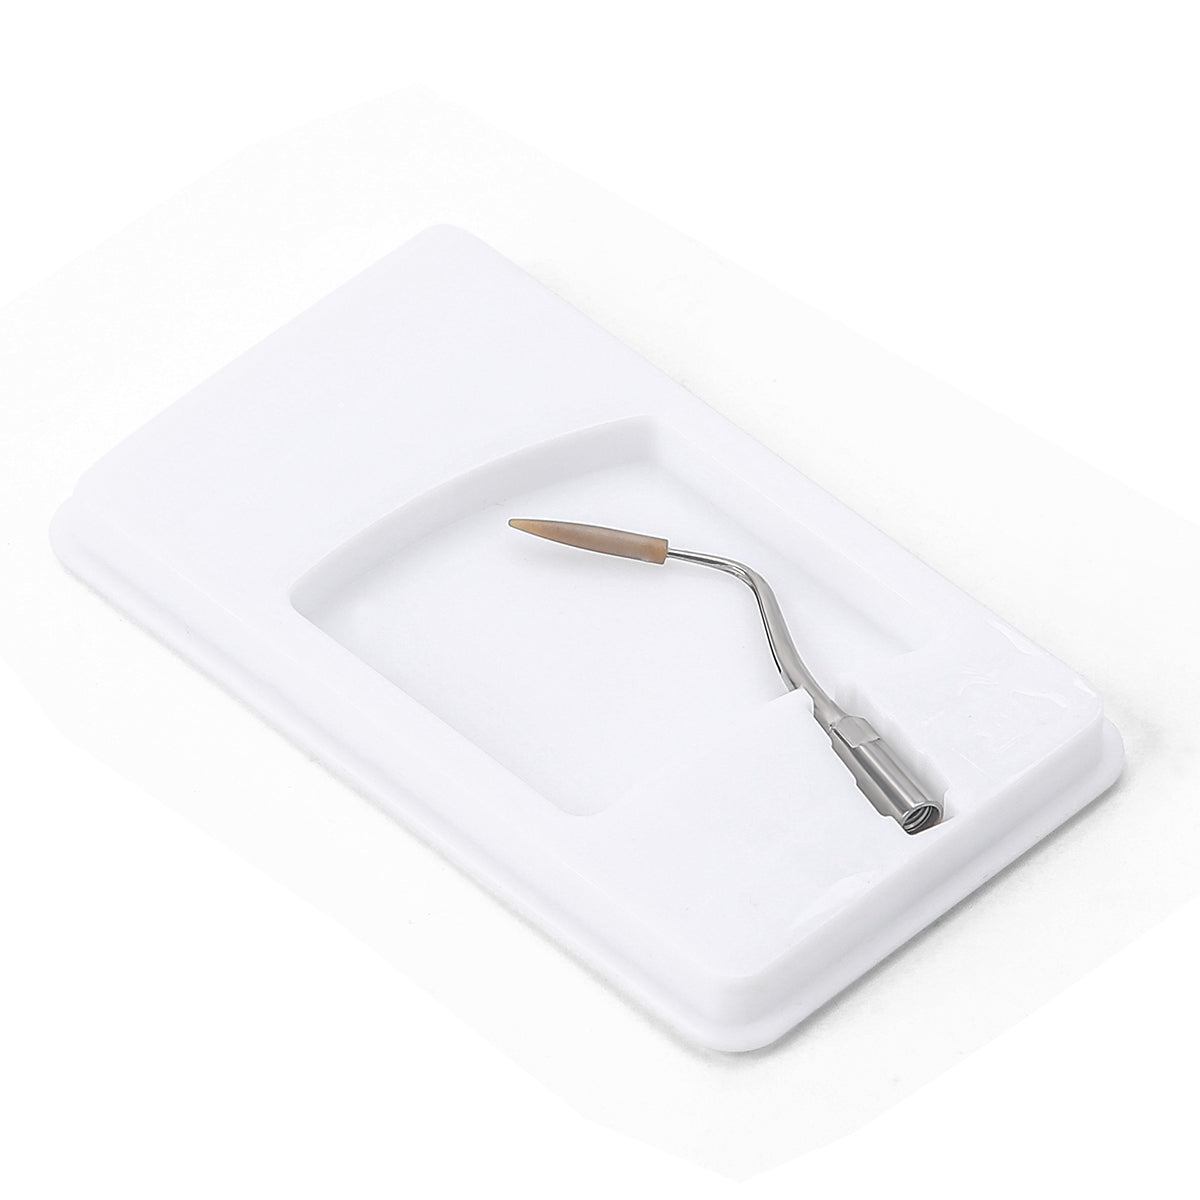 P90 Ultrasonic Scaler Tips Periodontal Implant Cleaning Tip - pairaydental.com